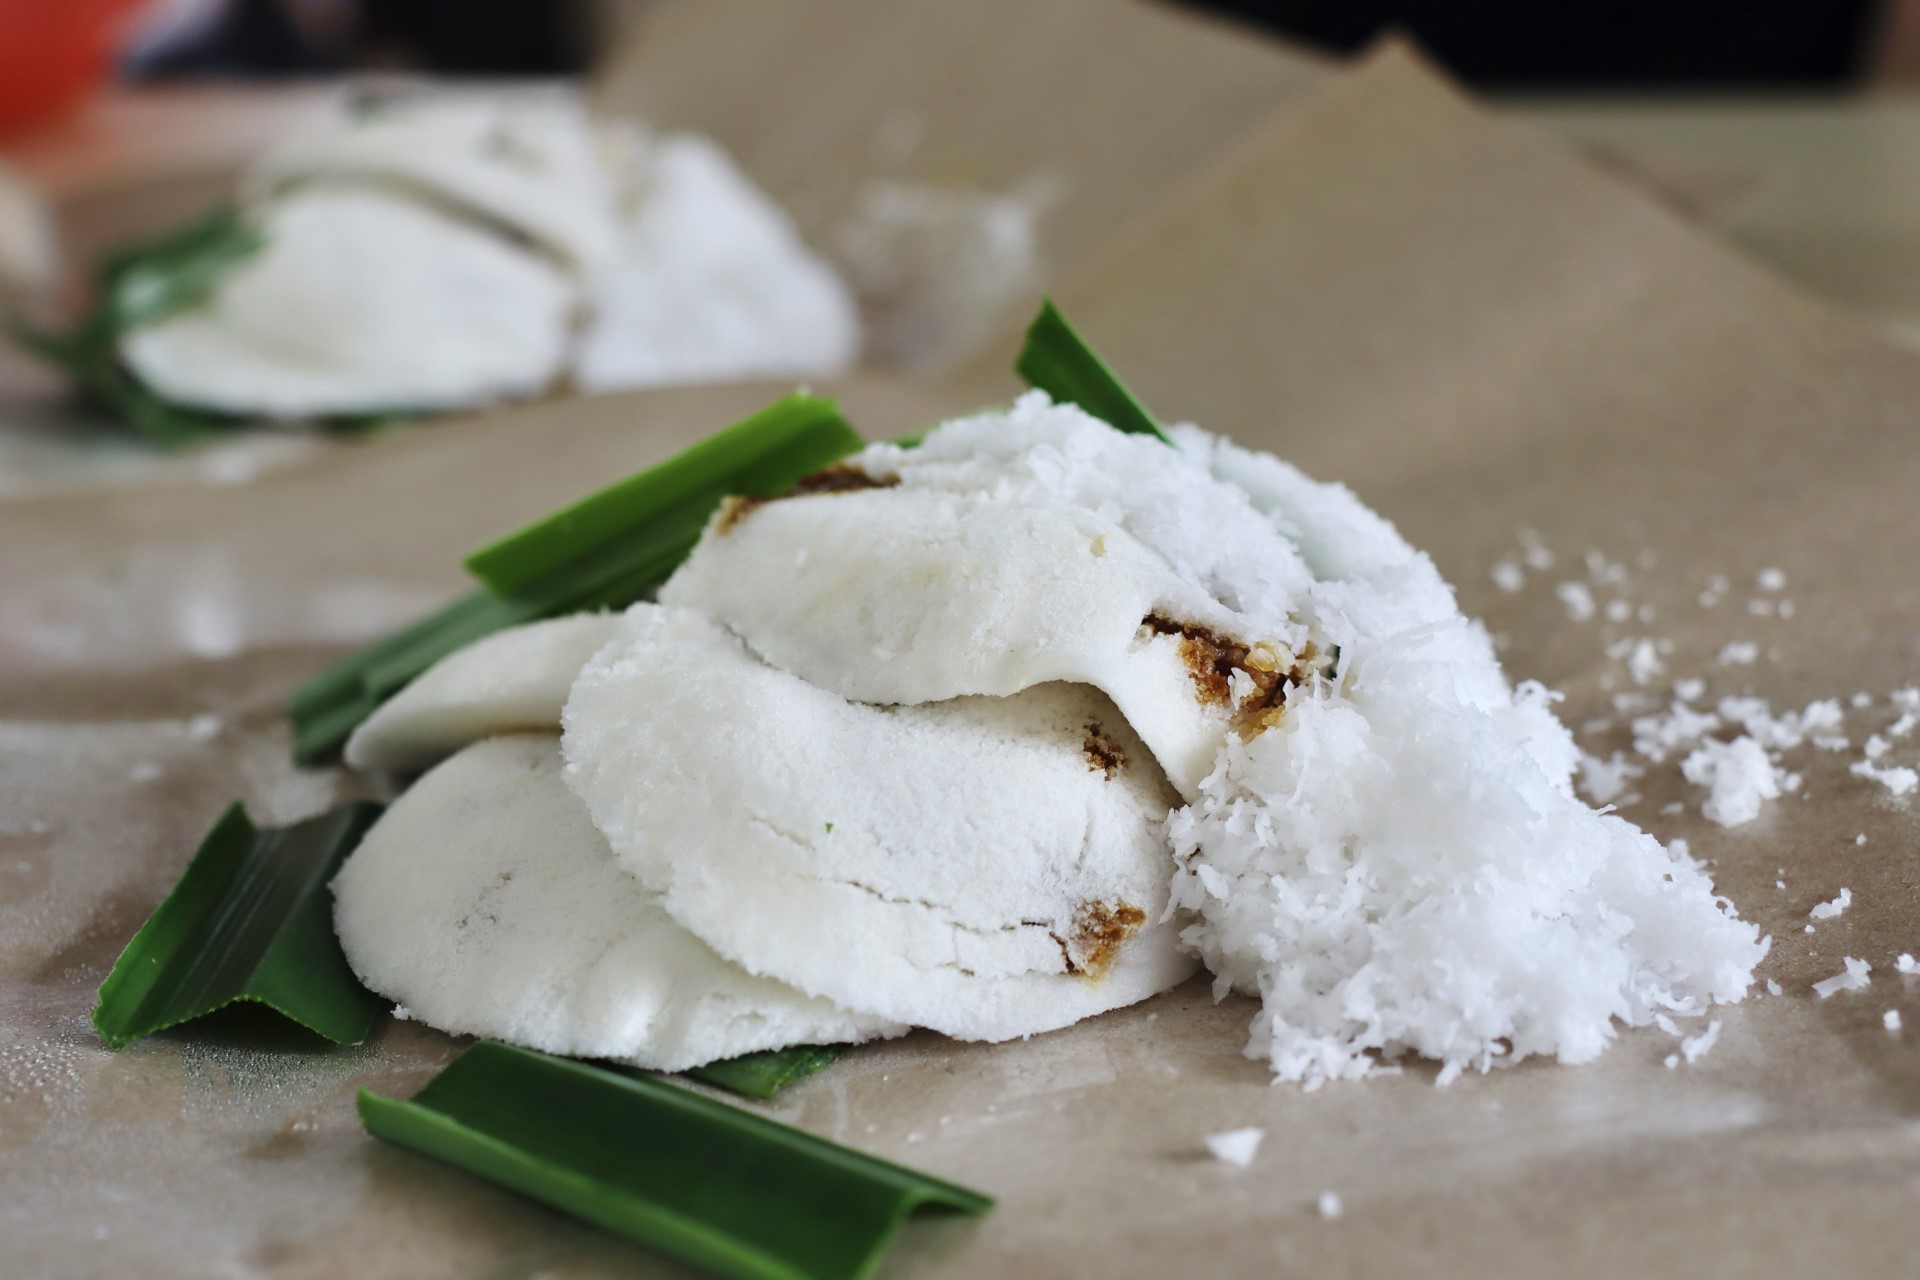 Putu piring - steamed rice flour with caramelised palm sugar, pandan leaves and grated coconut